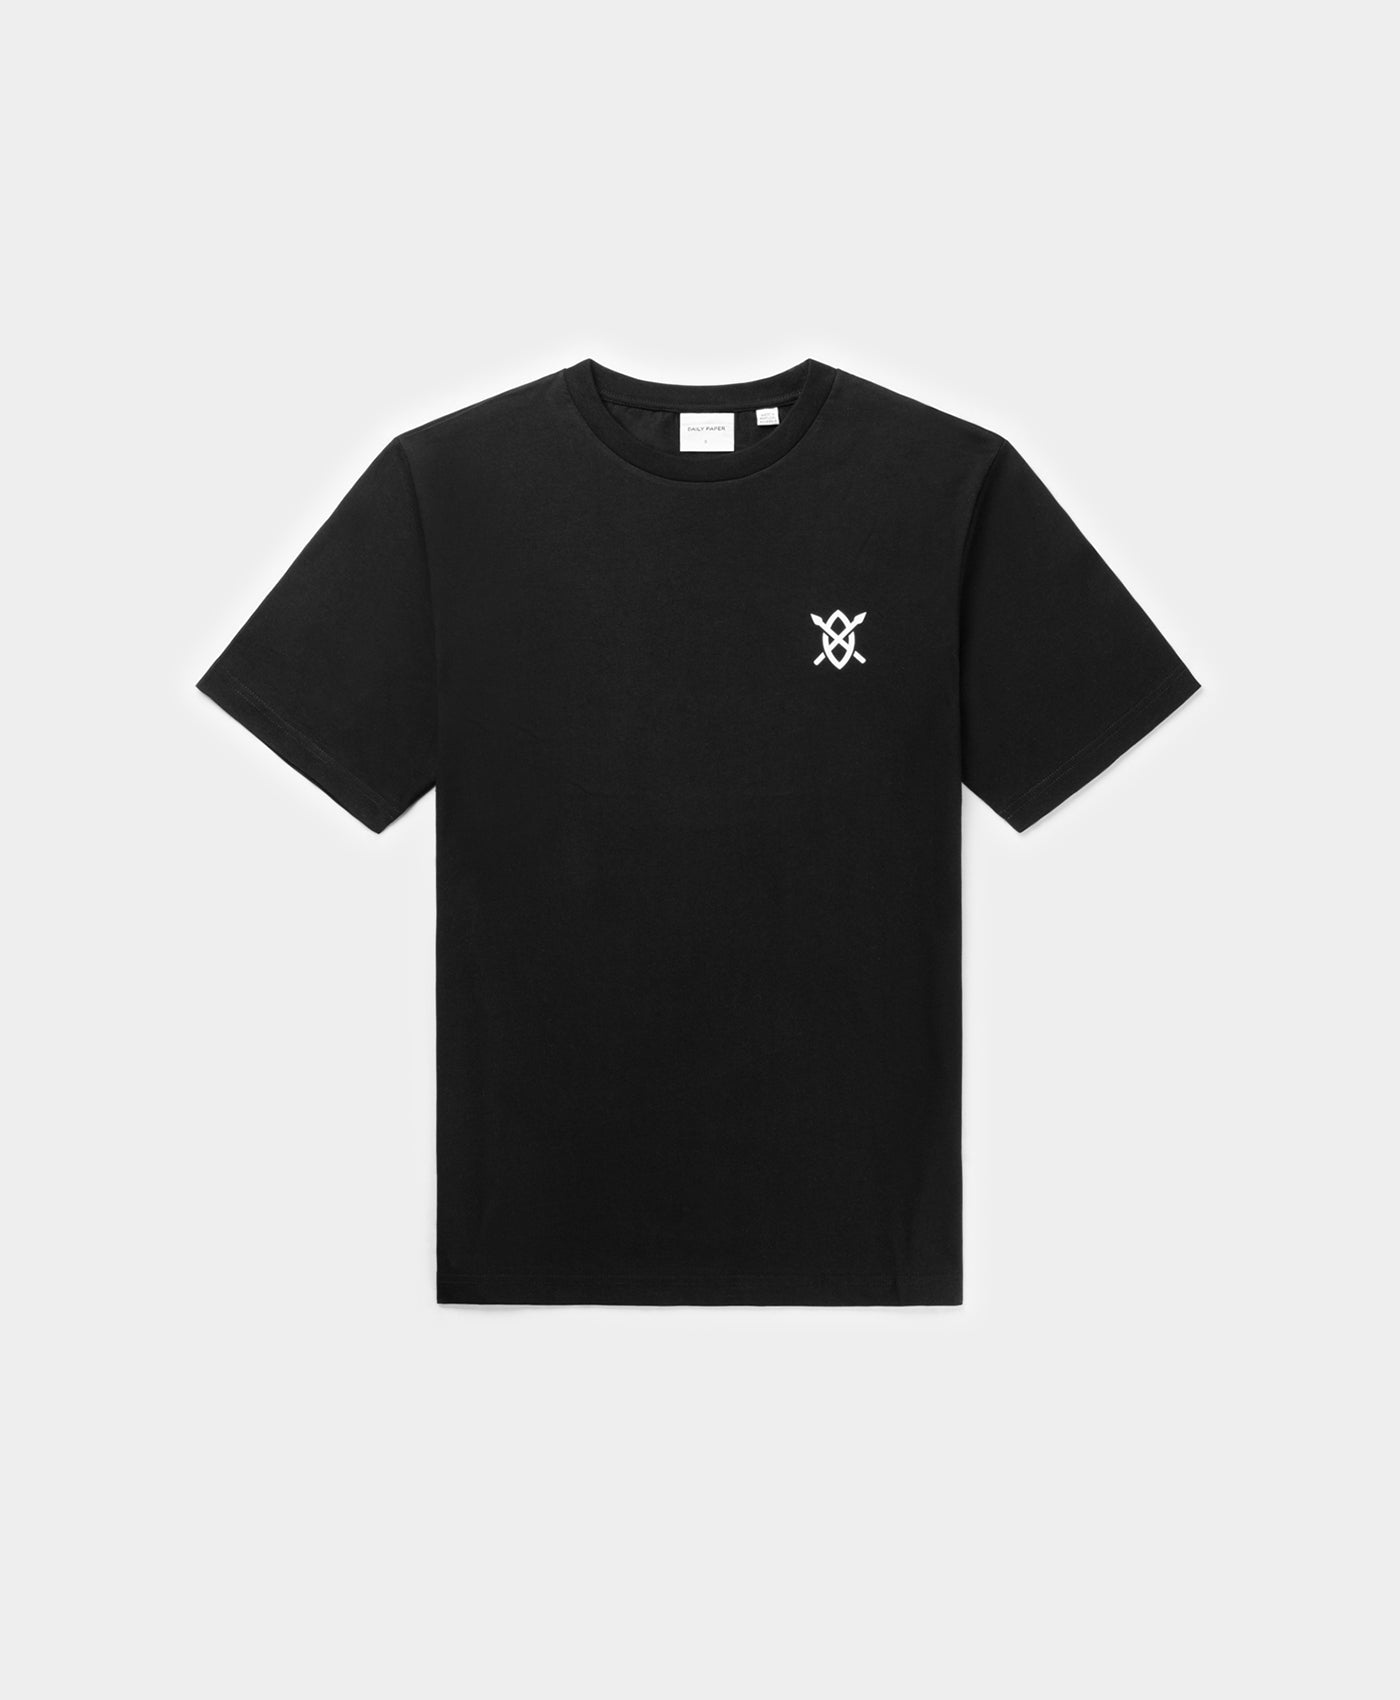 Daily Paper - Black White London Flagship Store T-Shirt – Daily Paper ...